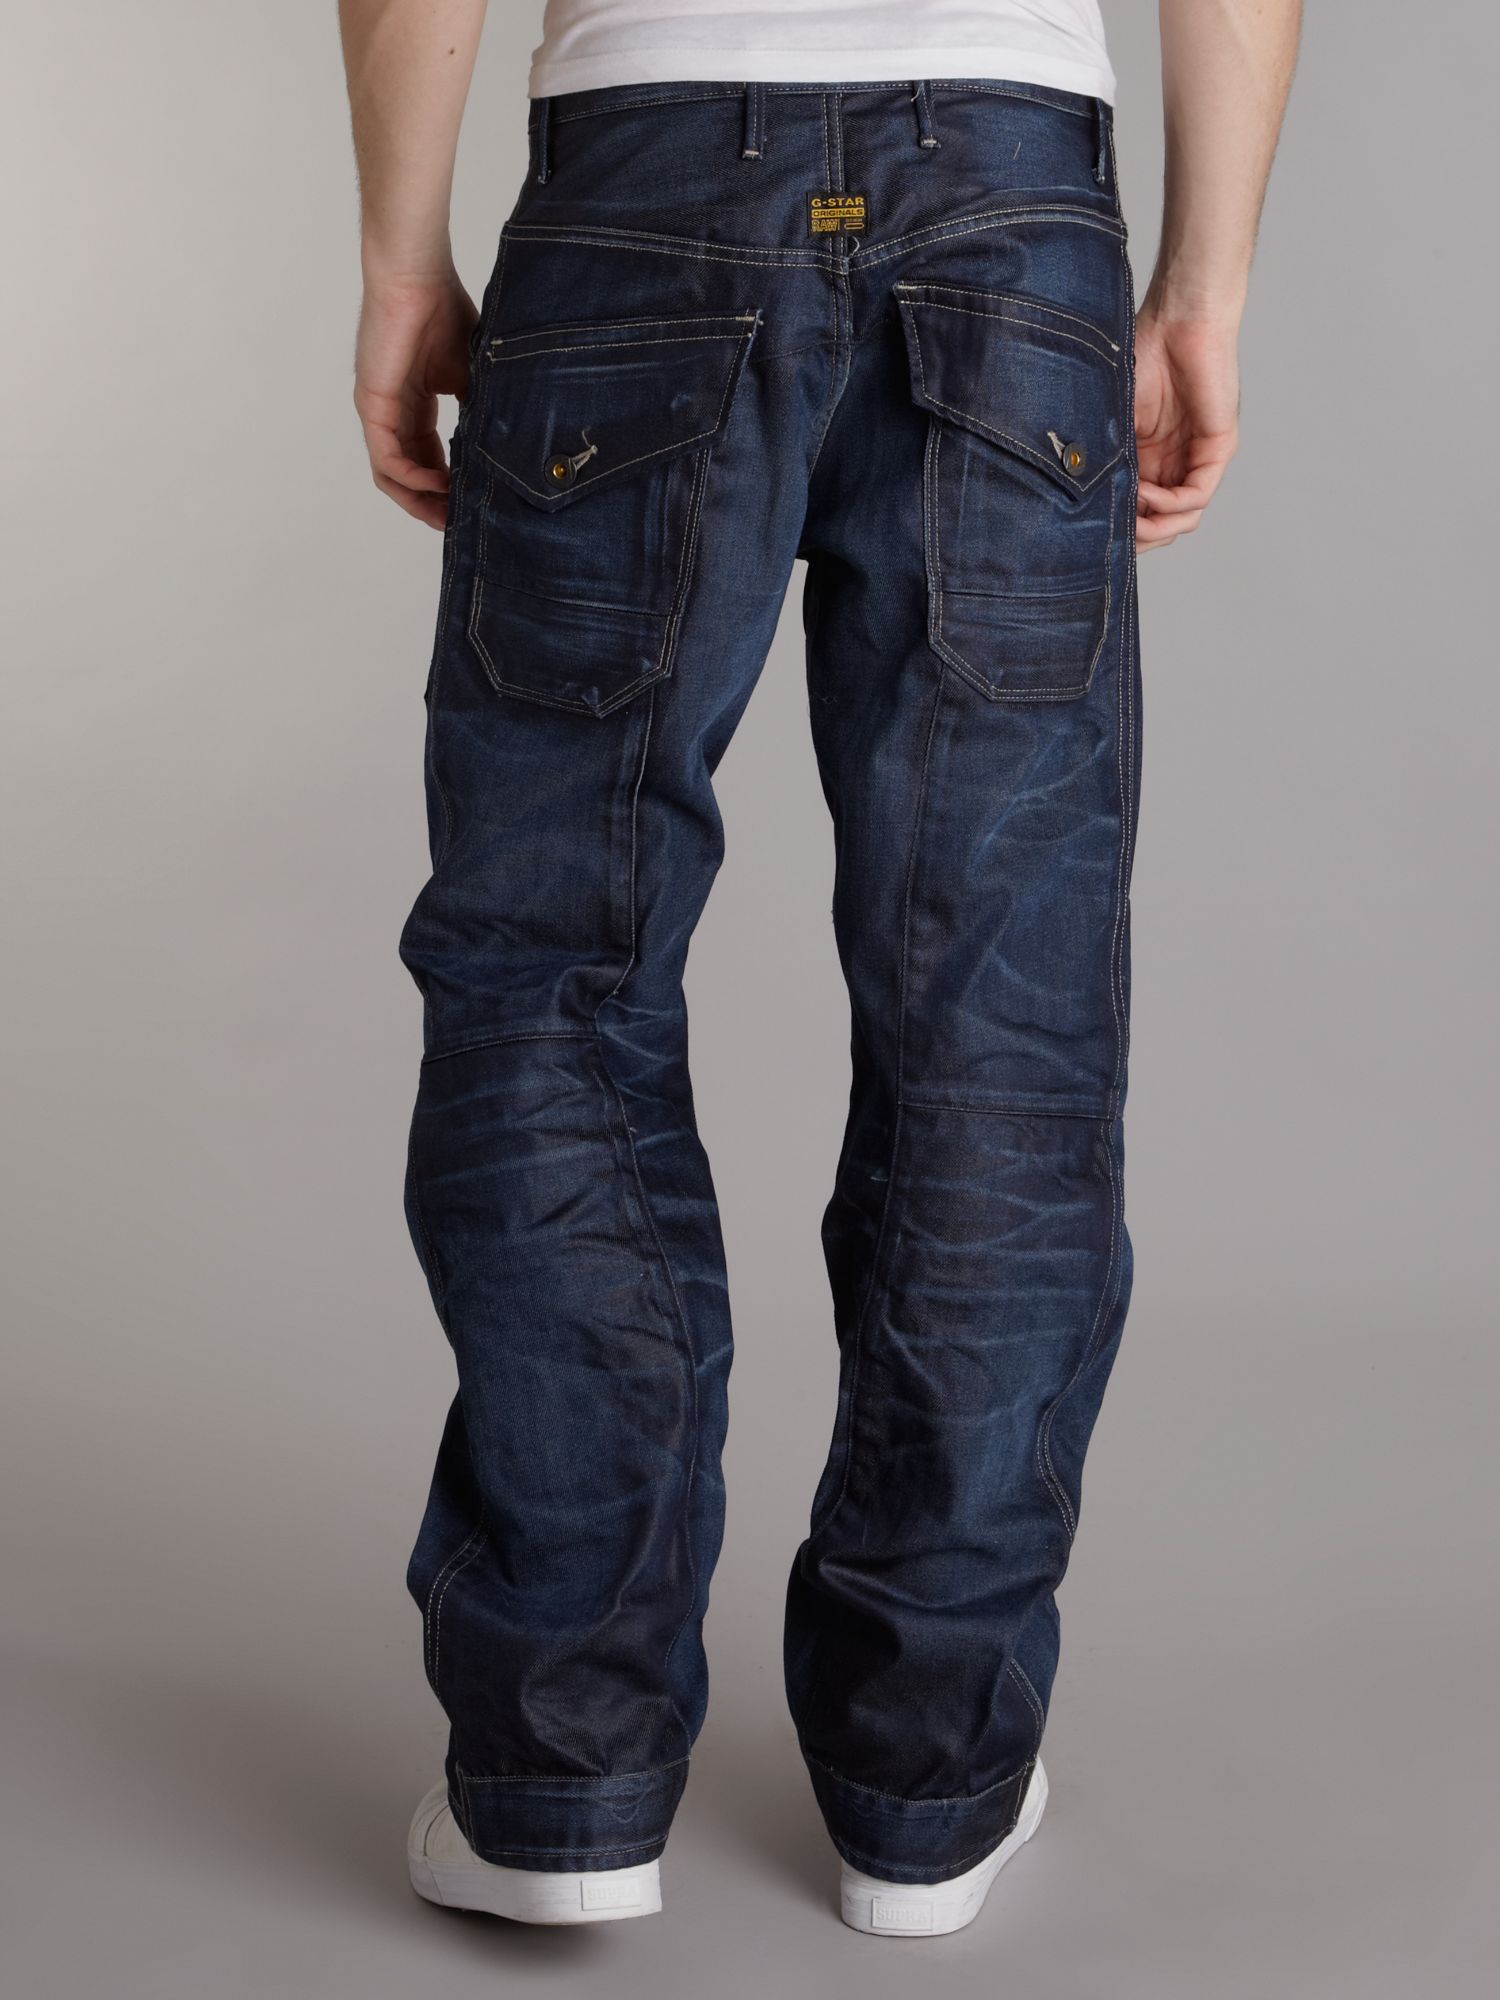 G-star raw Loose Fit Washed Jeans in Blue for Men | Lyst